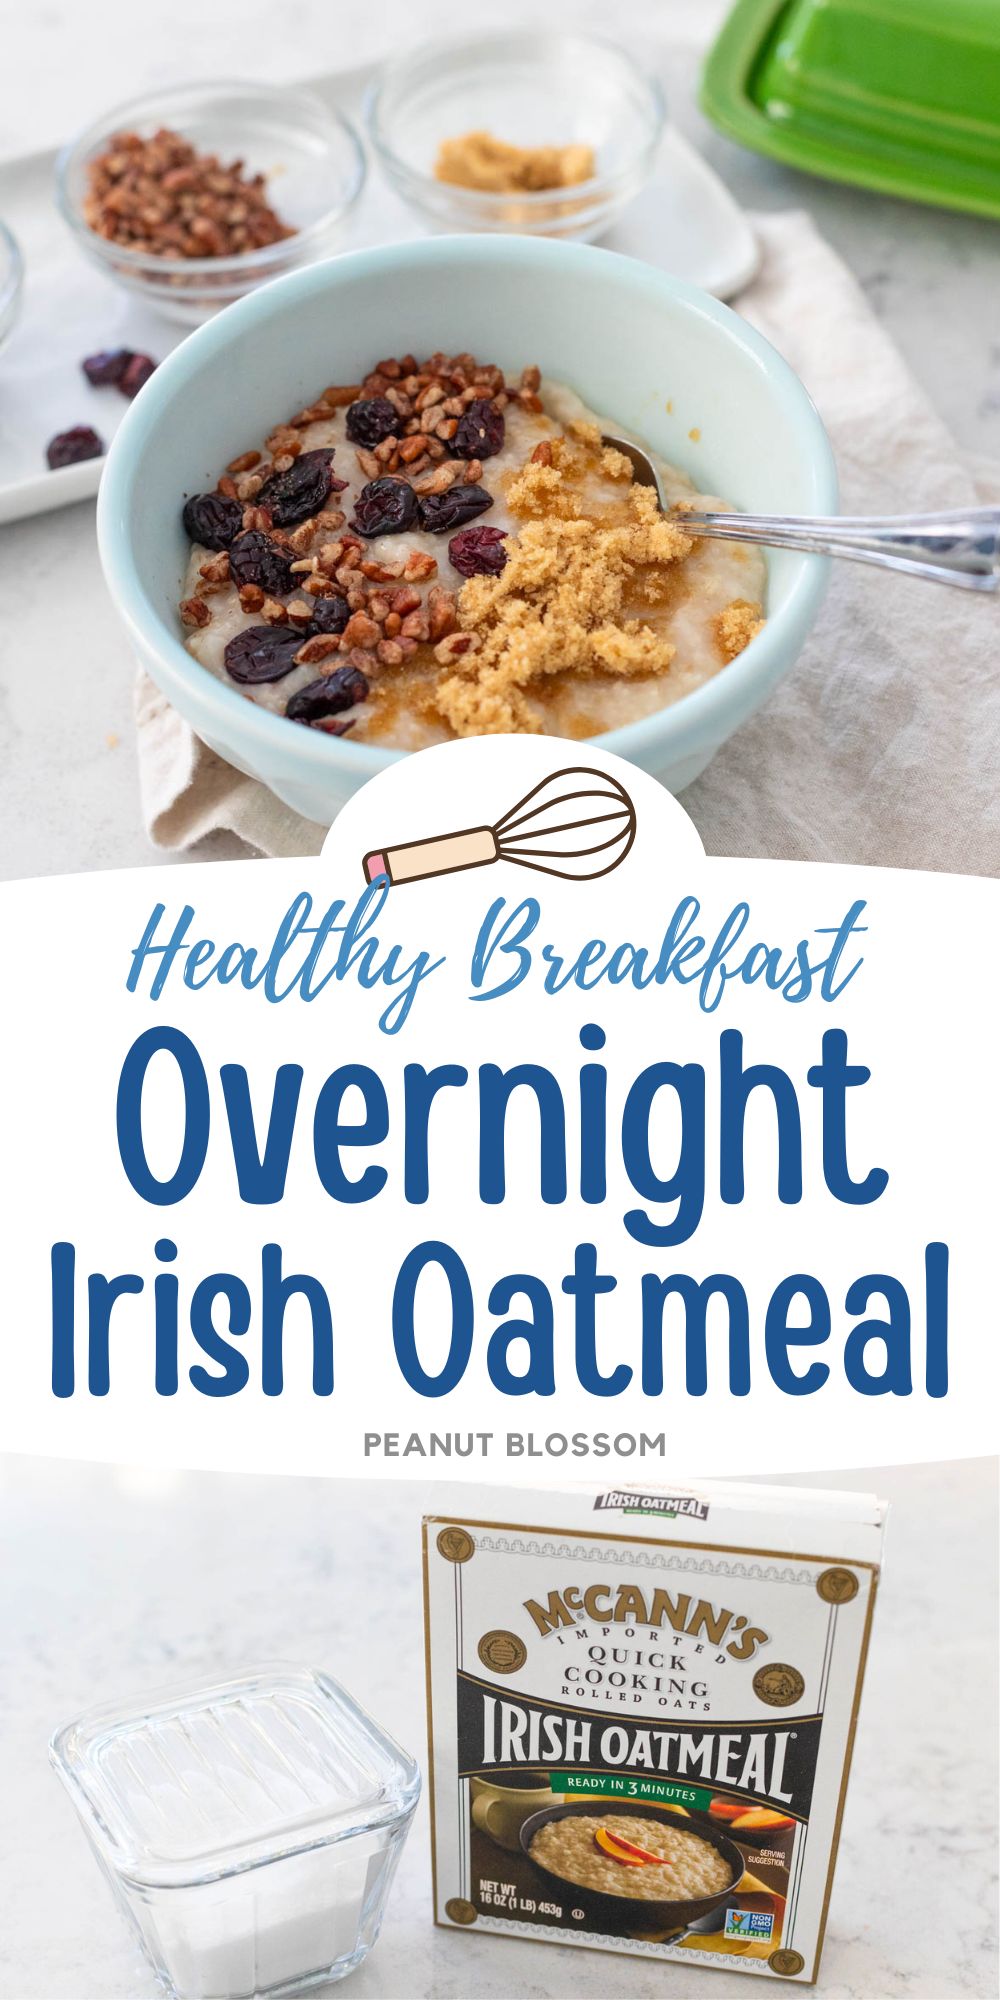 The photo collage shows a bowl of Irish oatmeal with dried fruit and nuts on top next to a photo of the box of oatmeal.